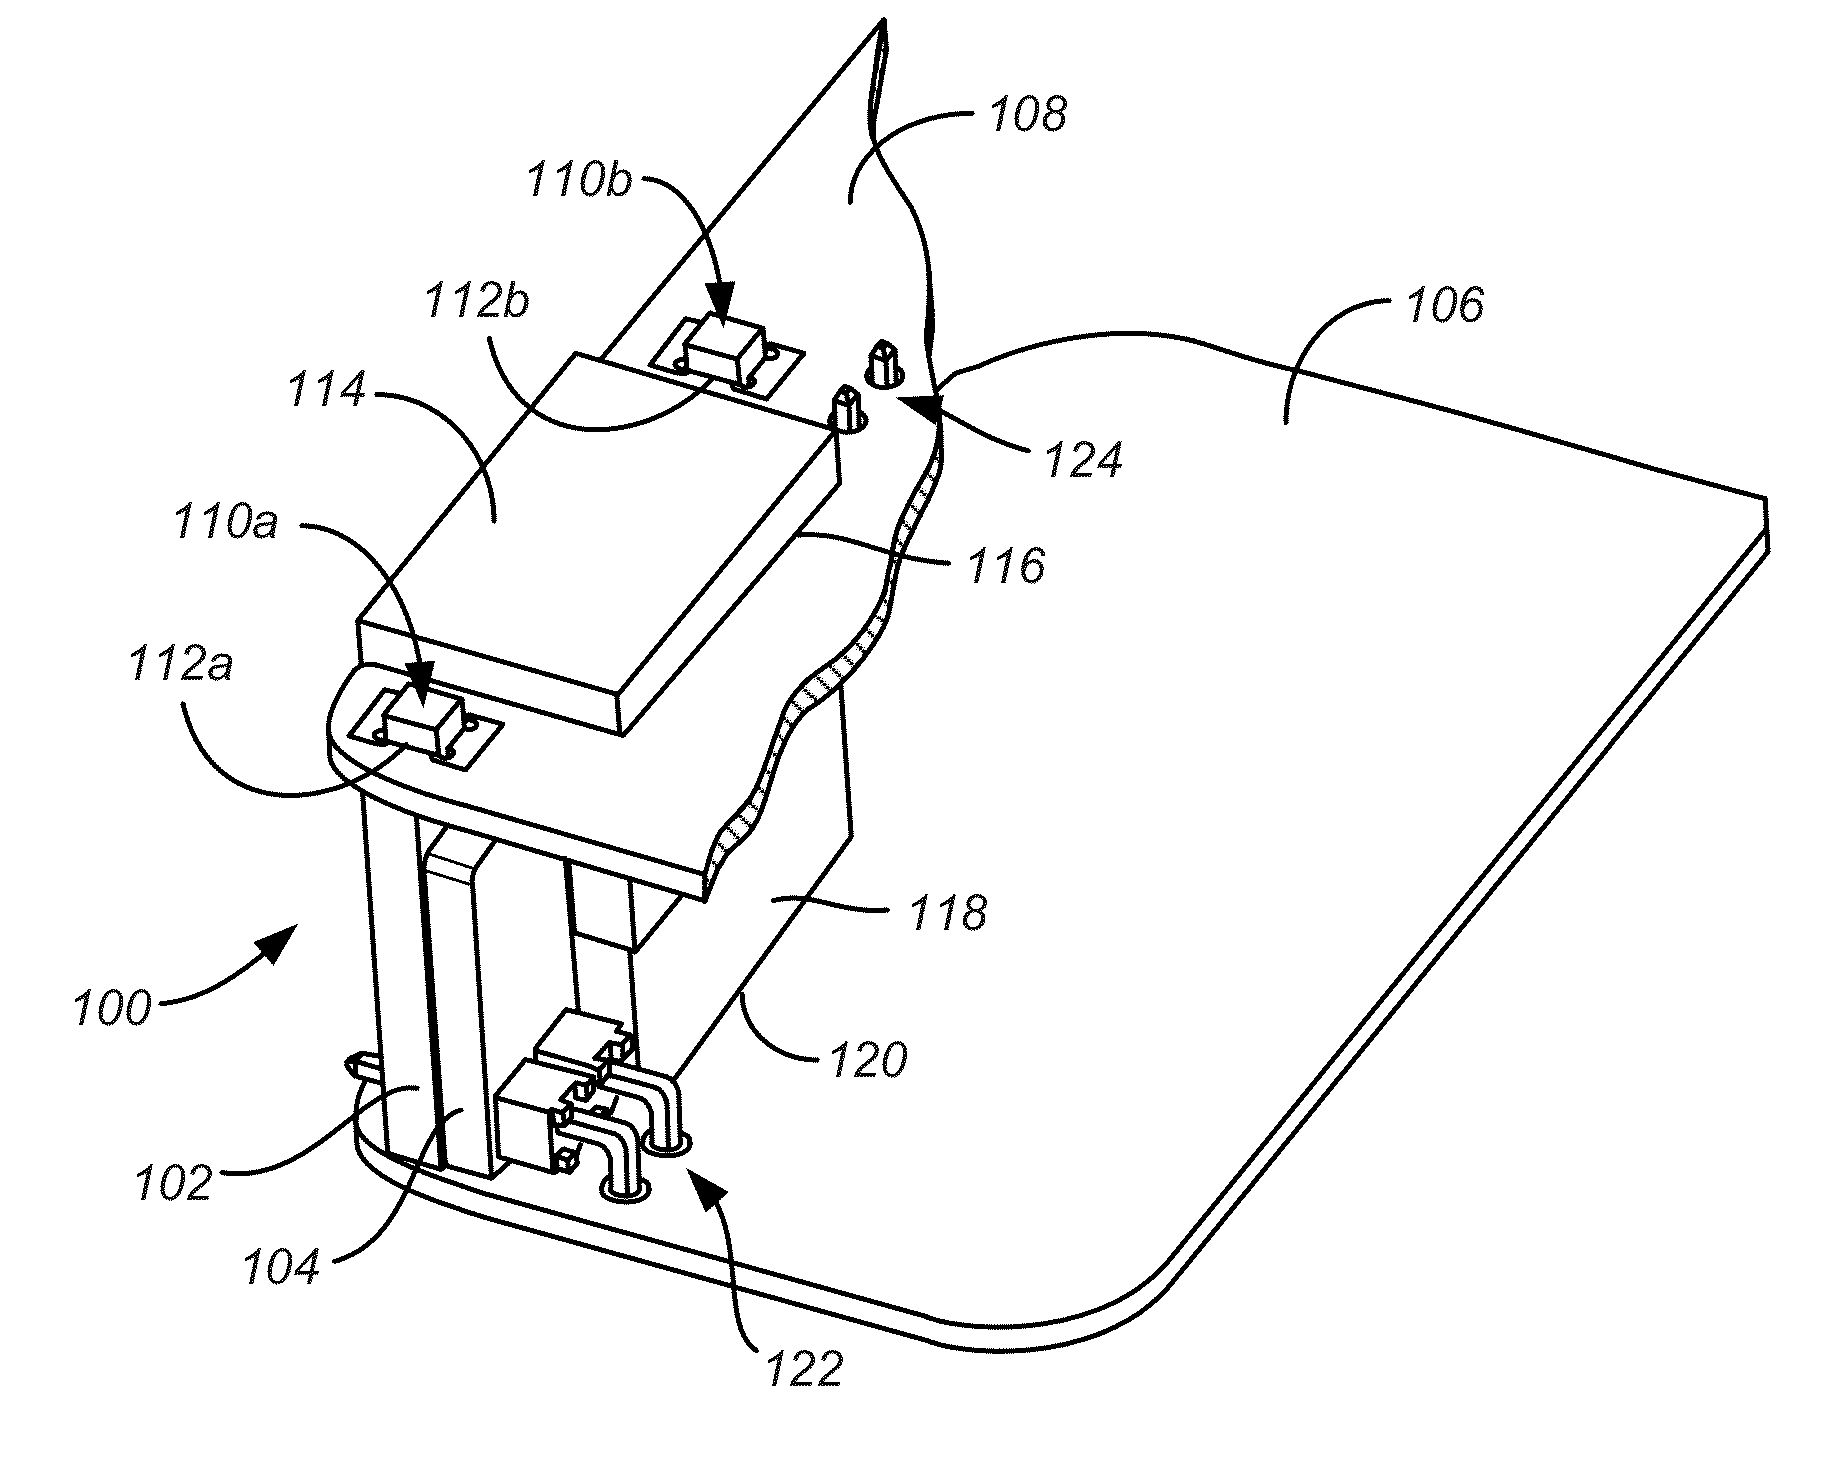 Power adapter components, housing and methods of assembly